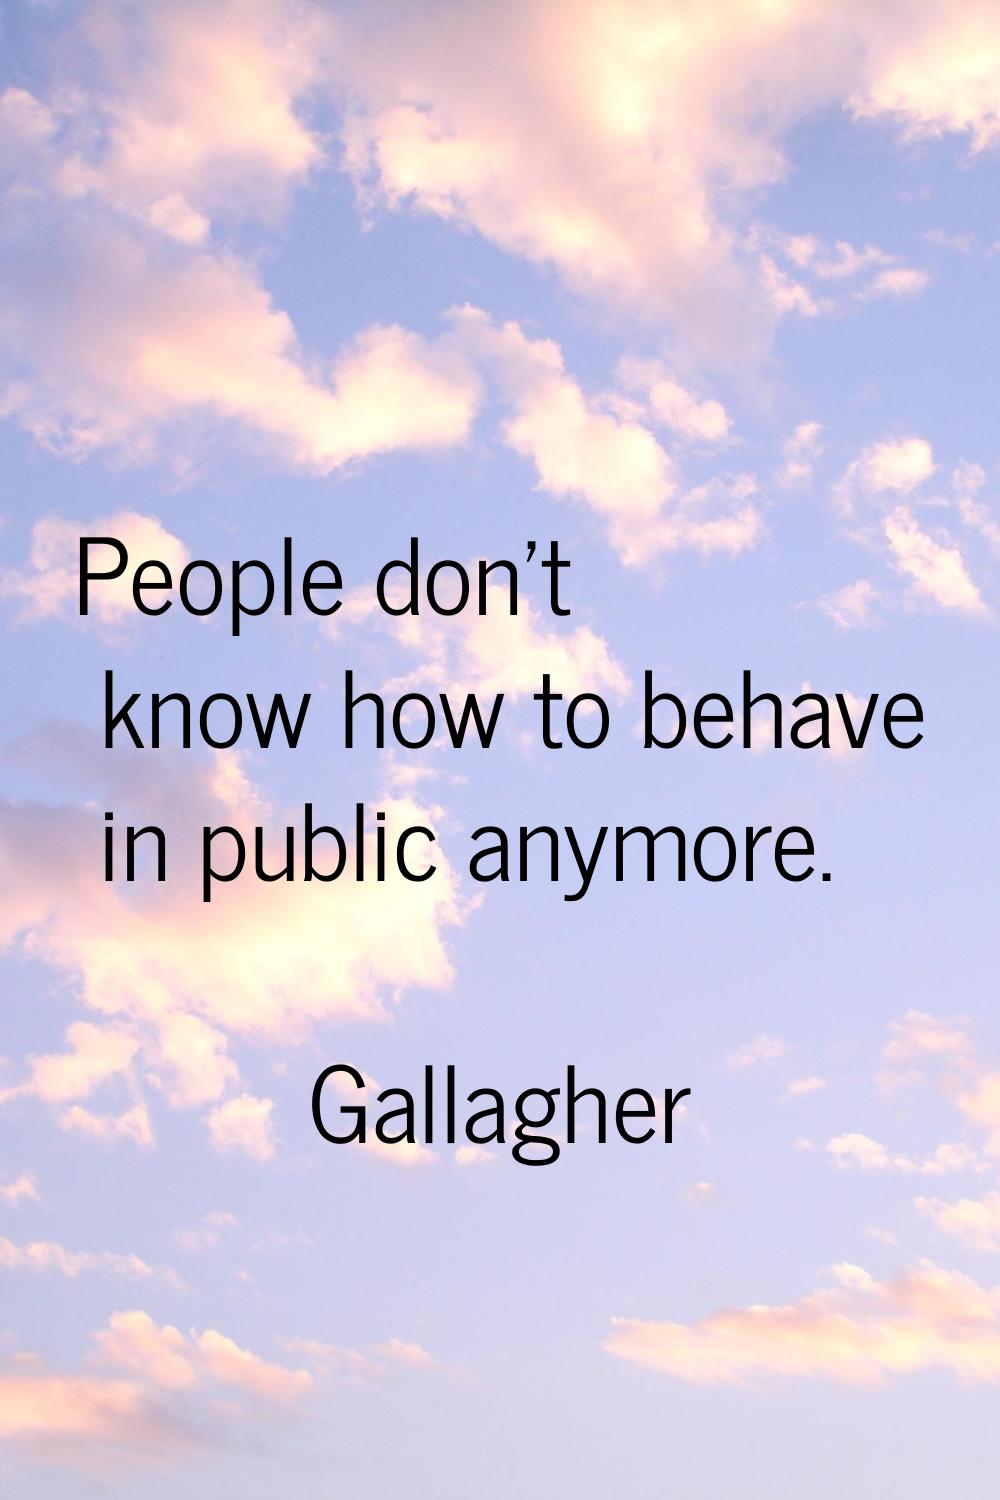 People don't know how to behave in public anymore.